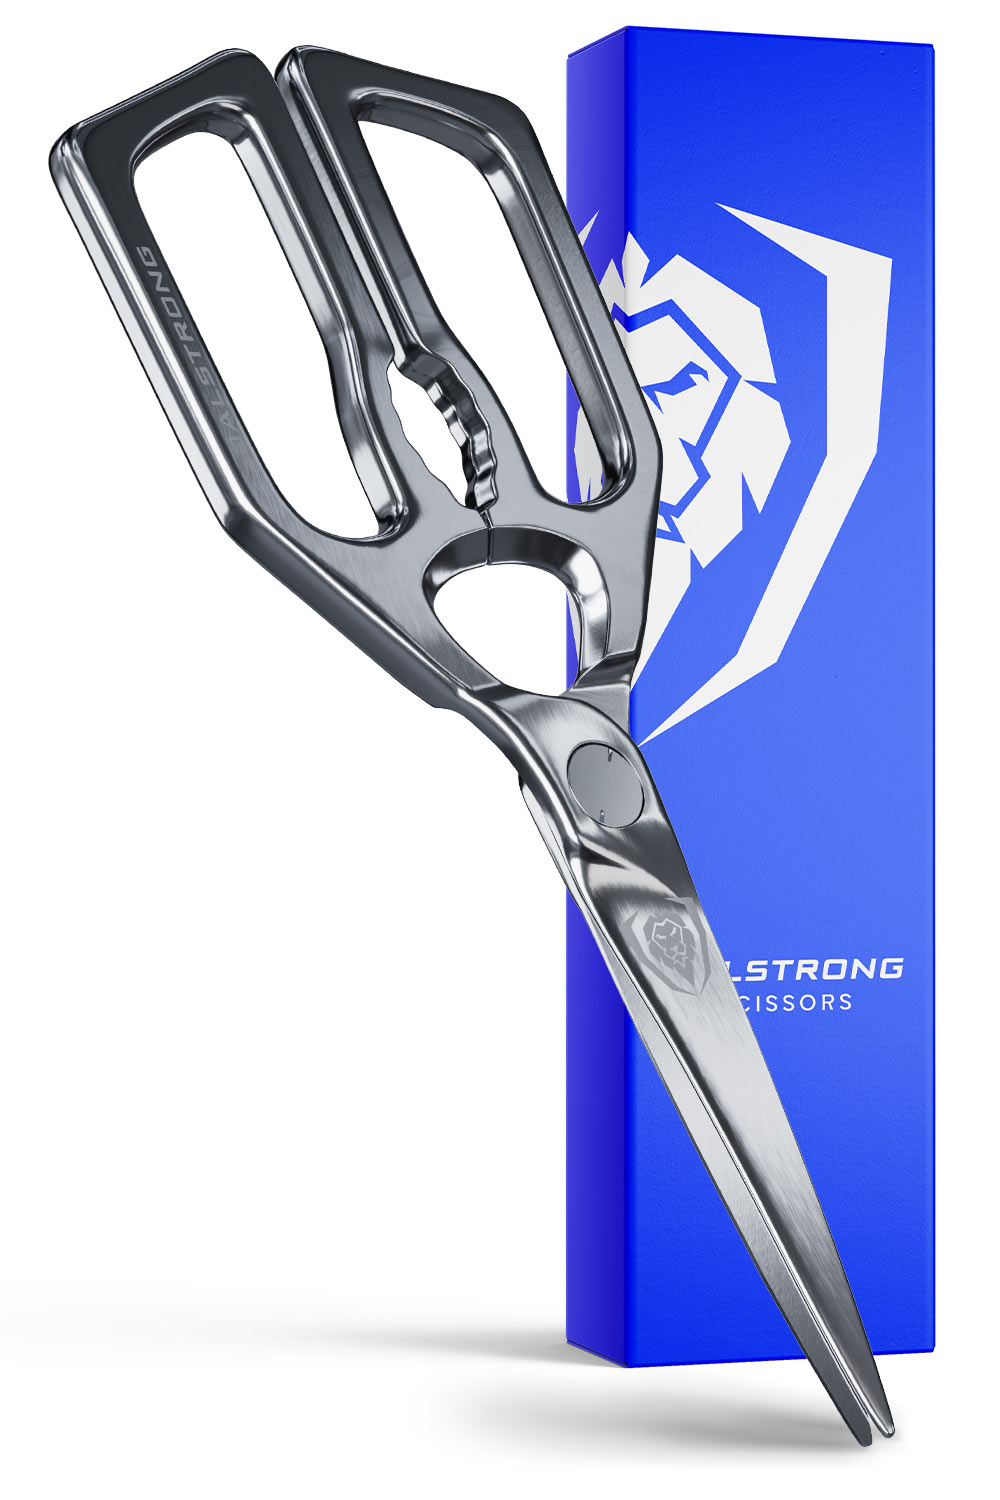 Dalstrong professional kitchen scissors in front of it's premium packaging.